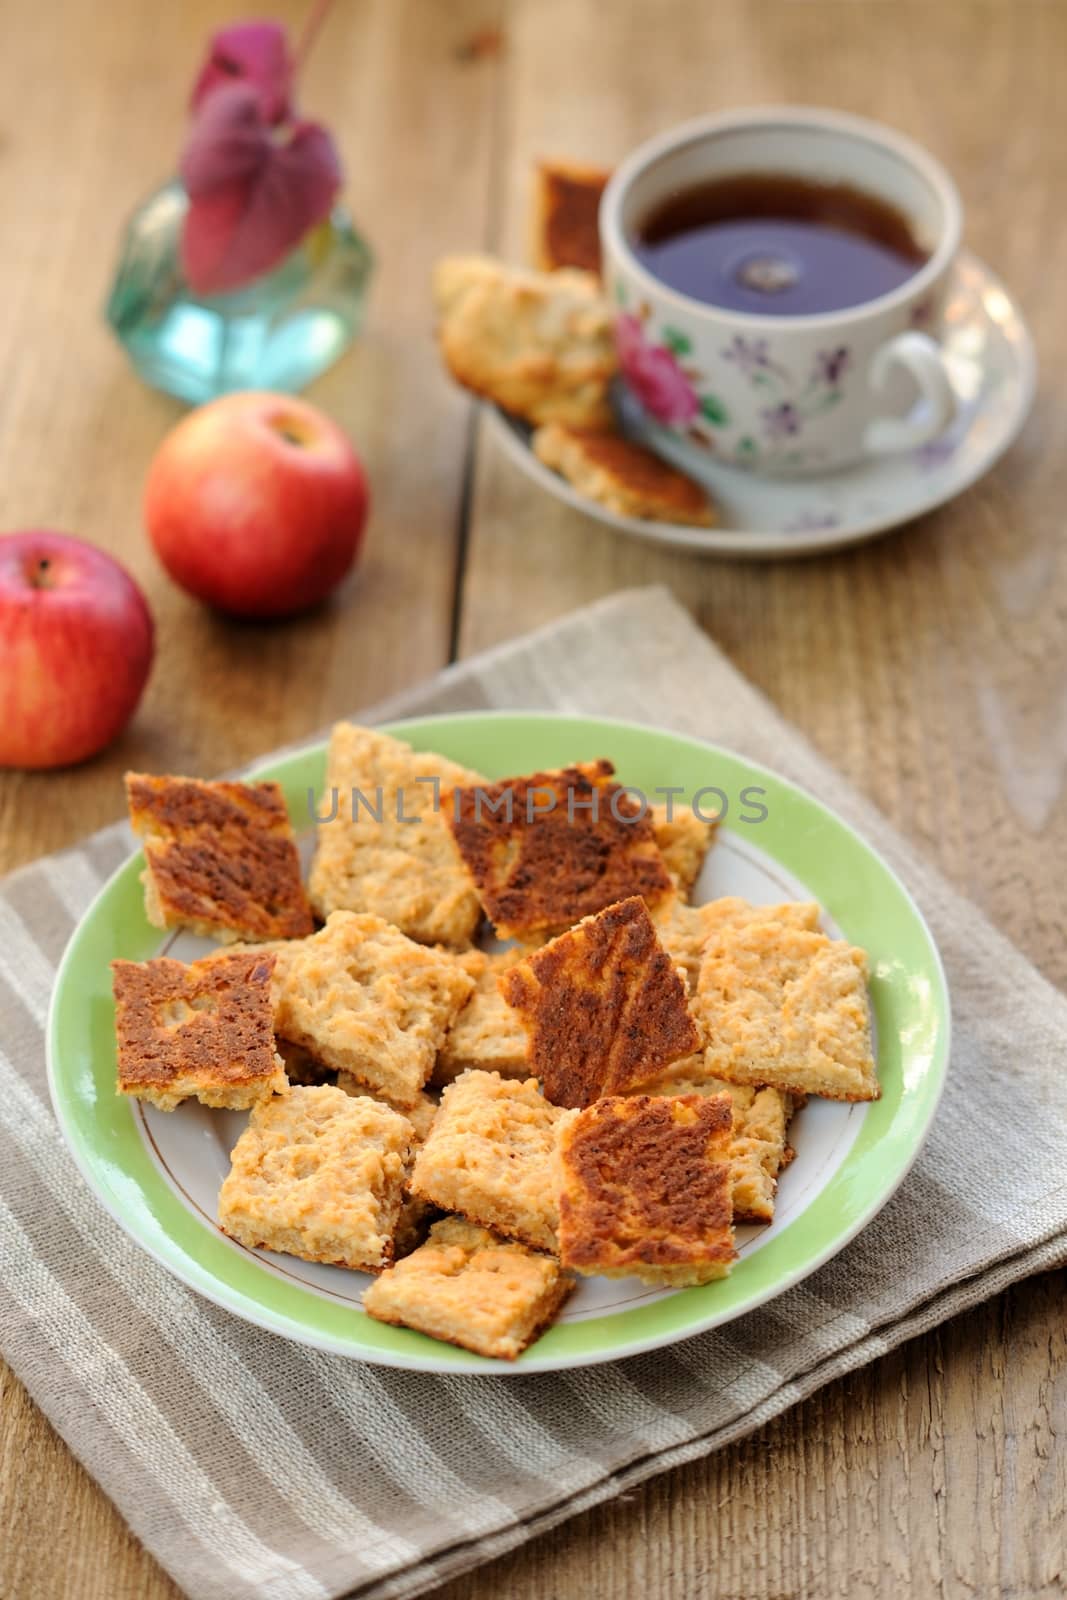 Black tea in a cup with cookies and apples on wooden background